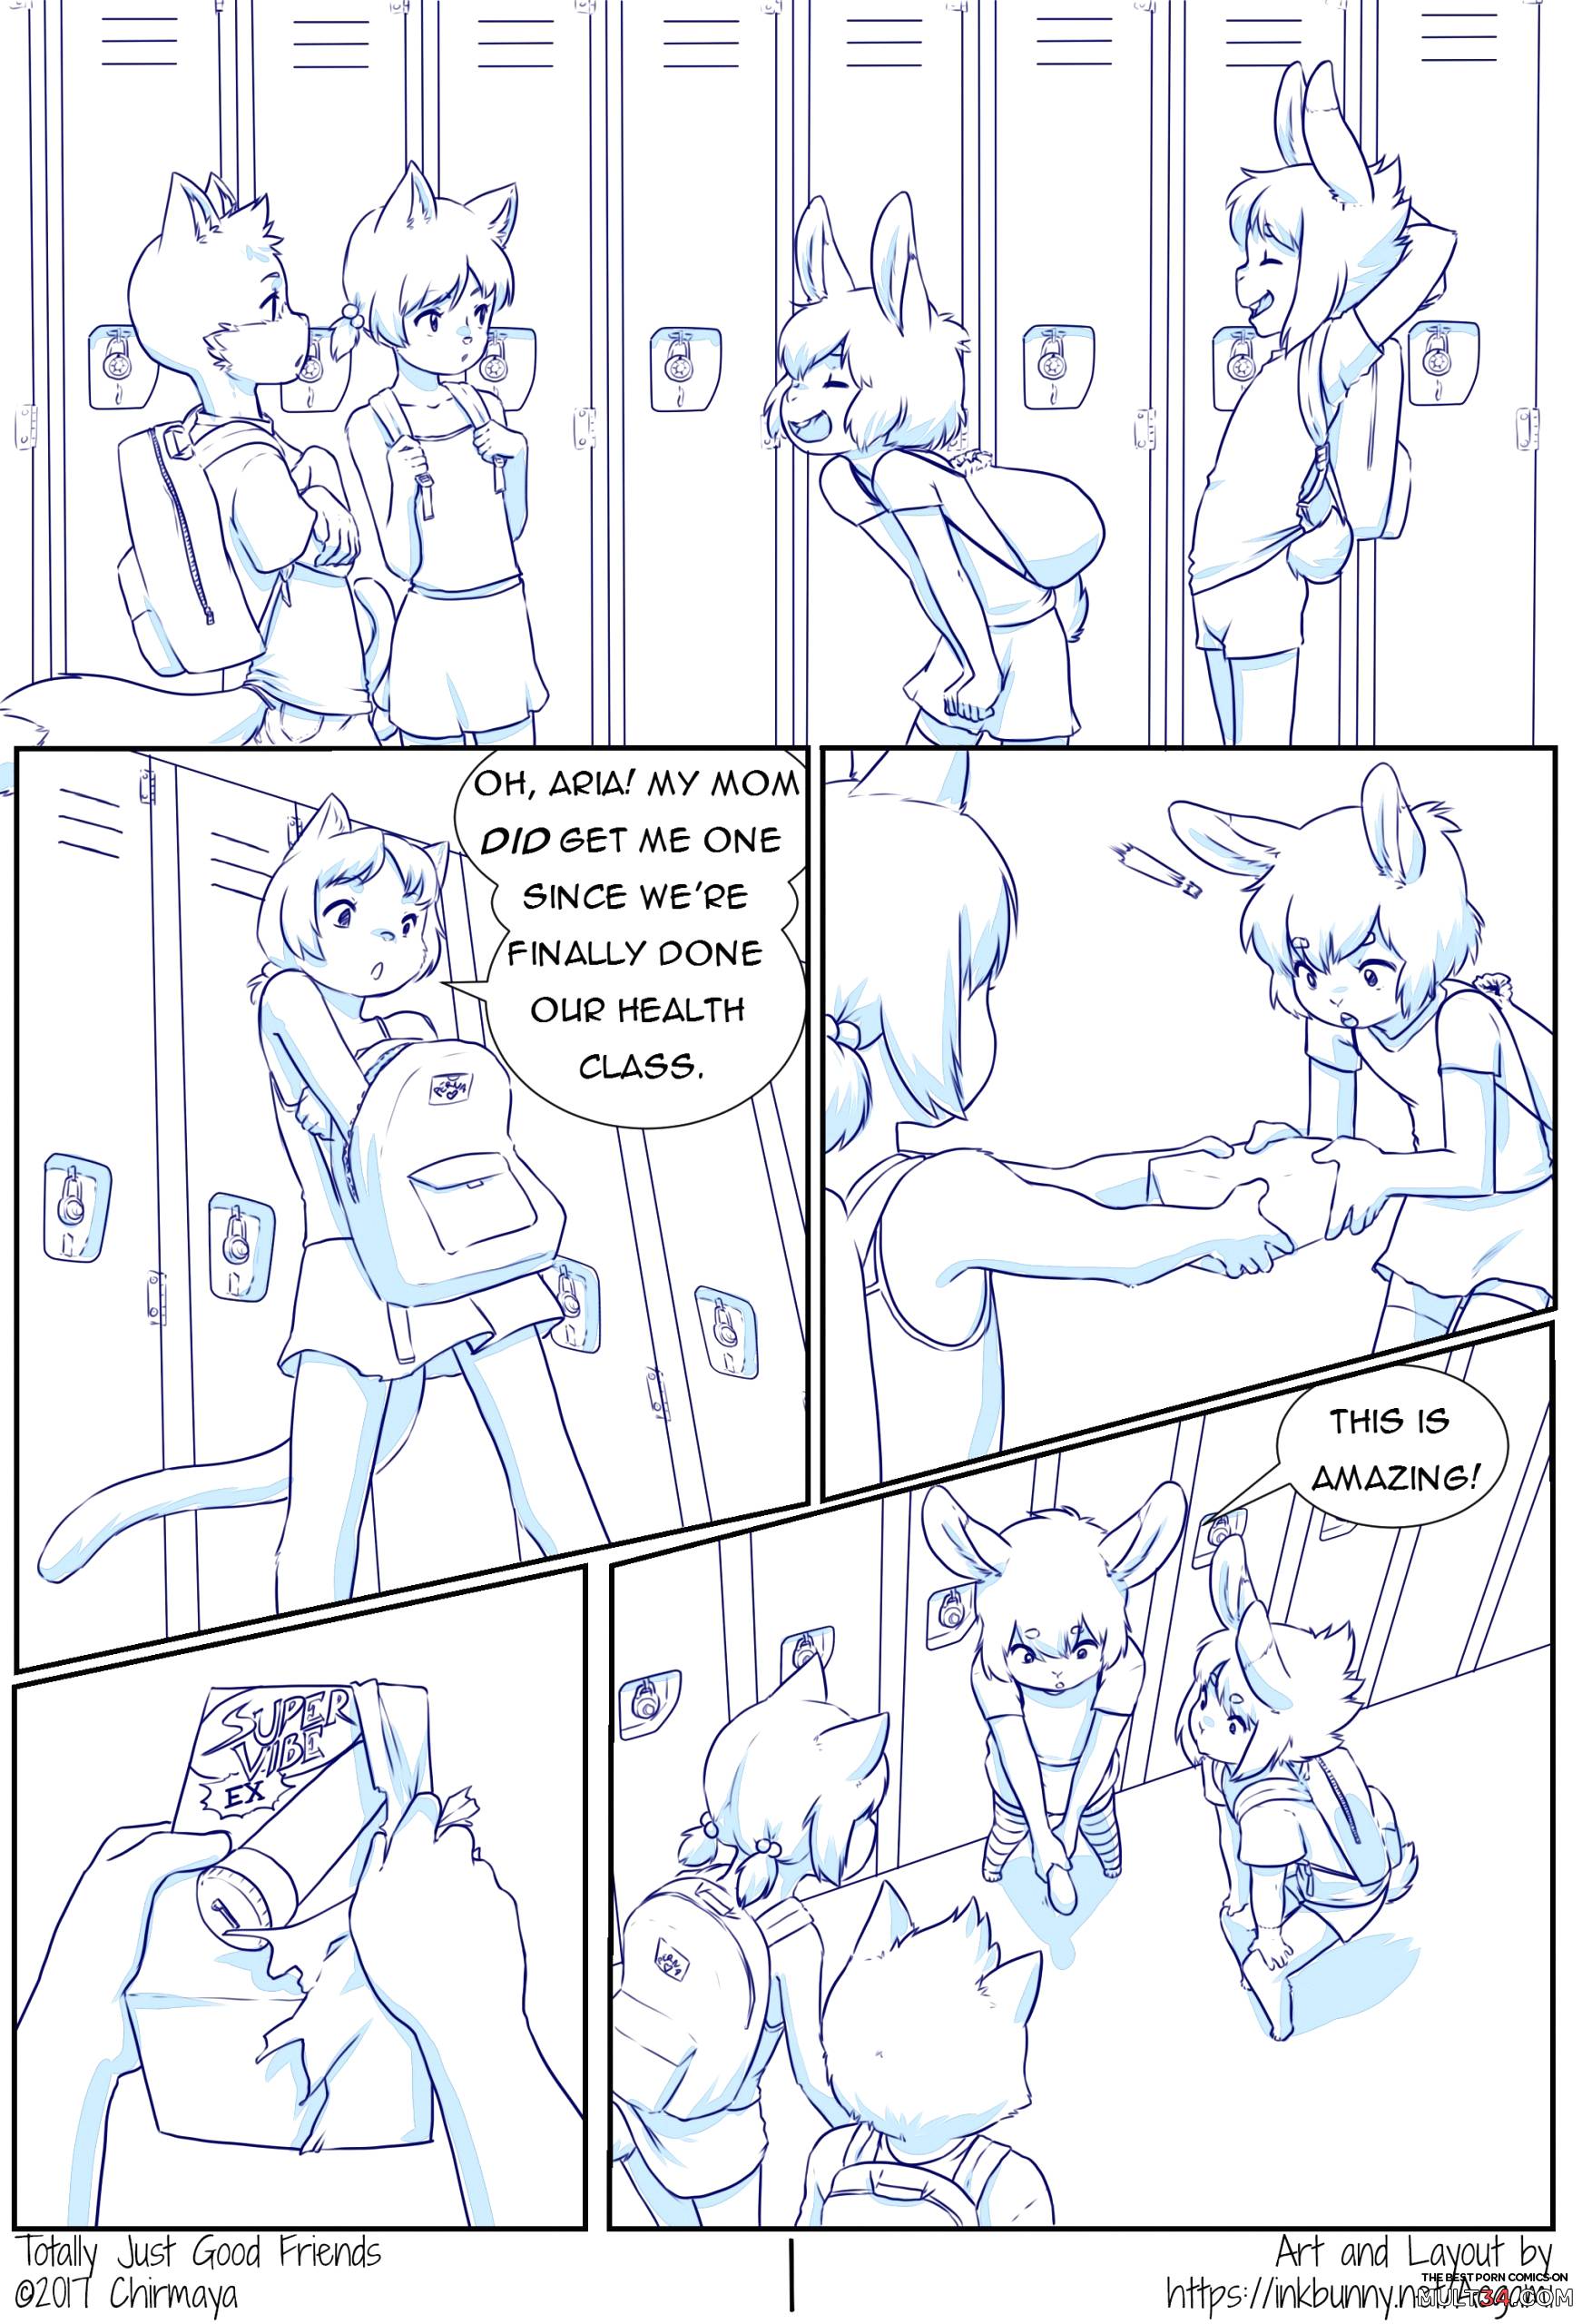 Totally Just Good Friends page 2